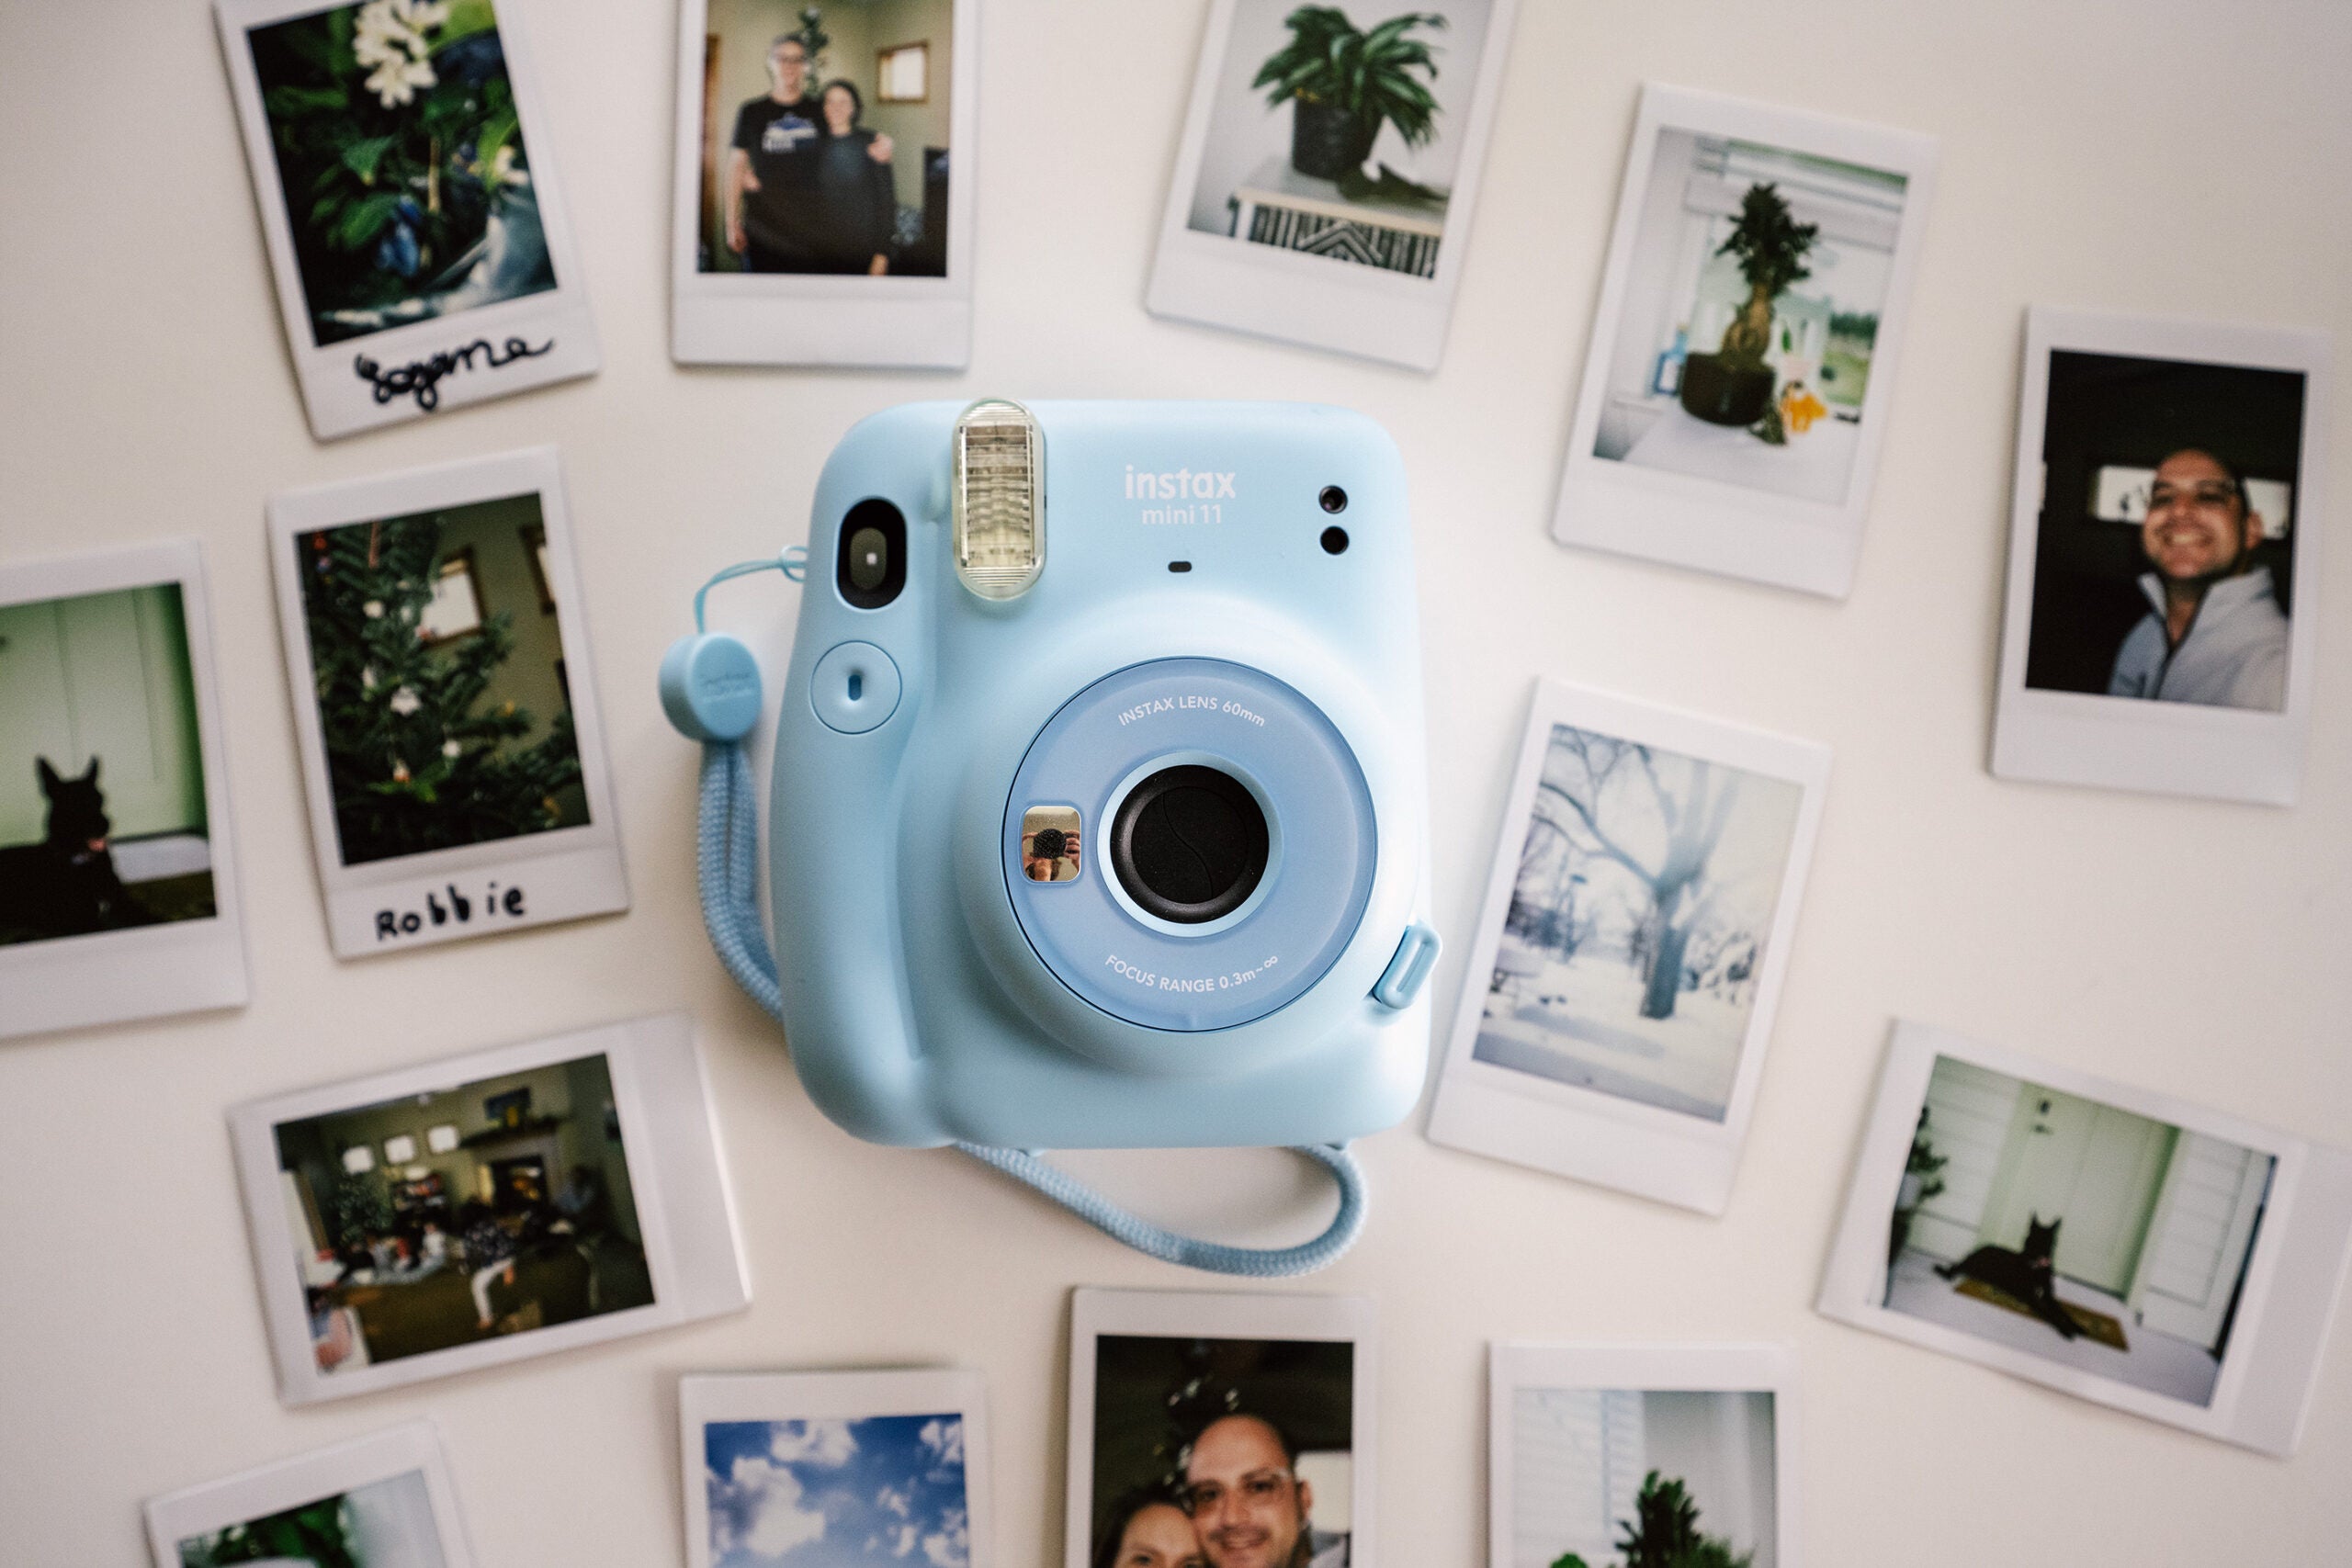 Hertogin ritme Observatie Instax Mini 11 review: A fun party trick | Popular Photography